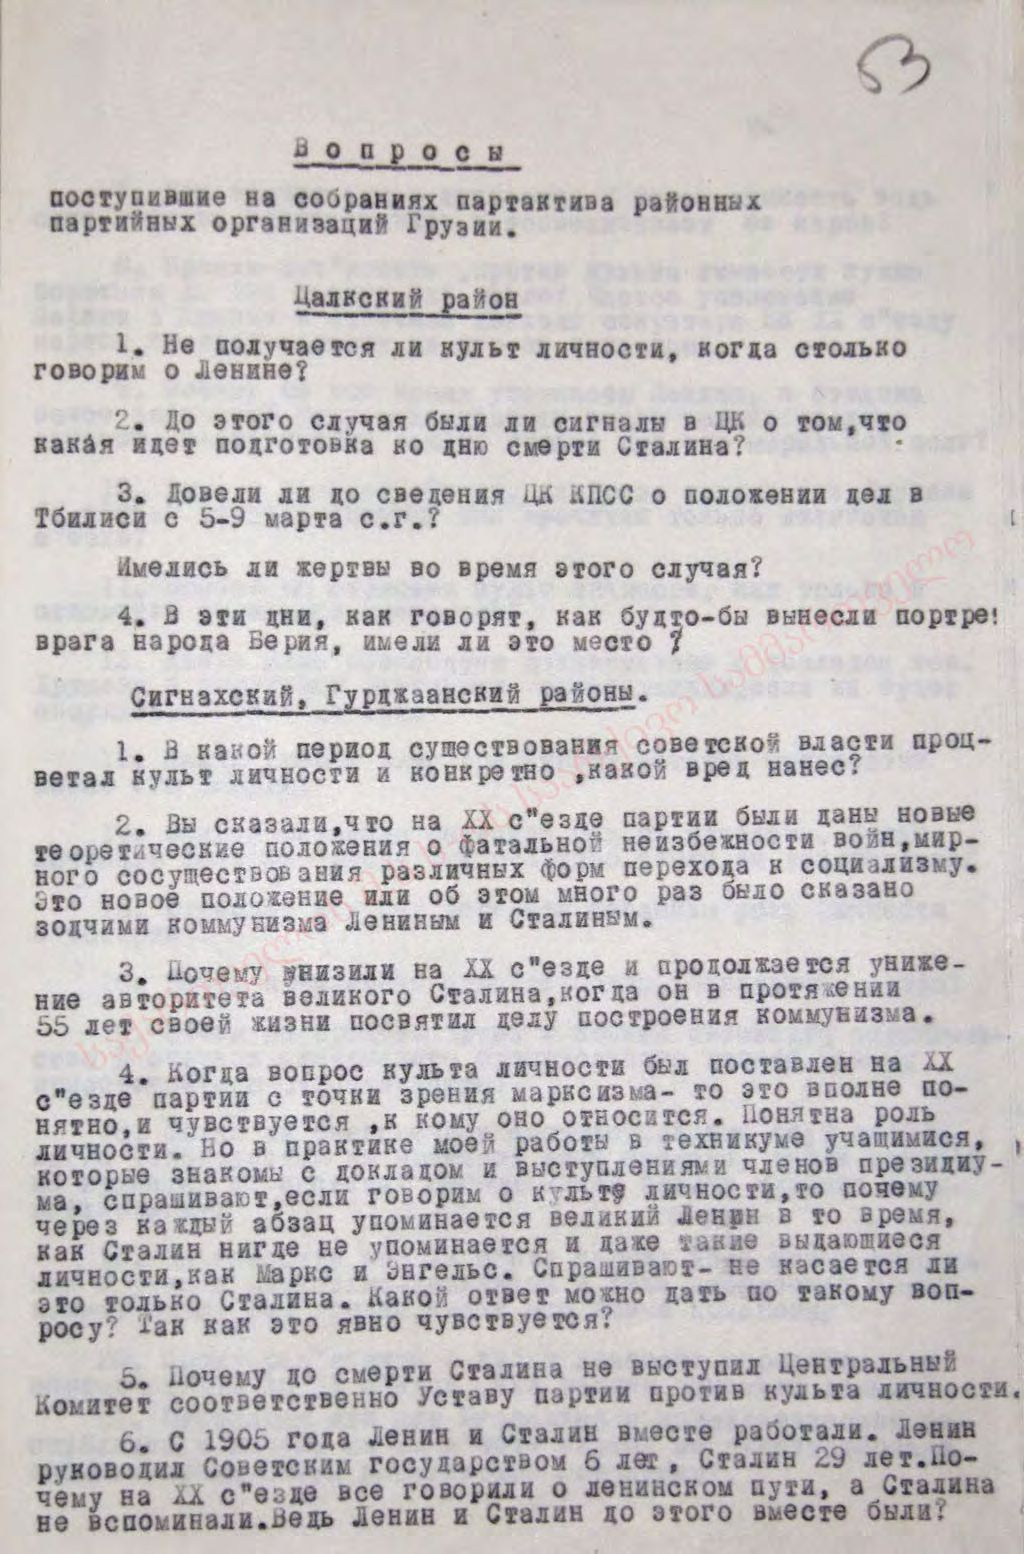 List of questions which were asked during the discussion about the speech of N. S. Khrushchev